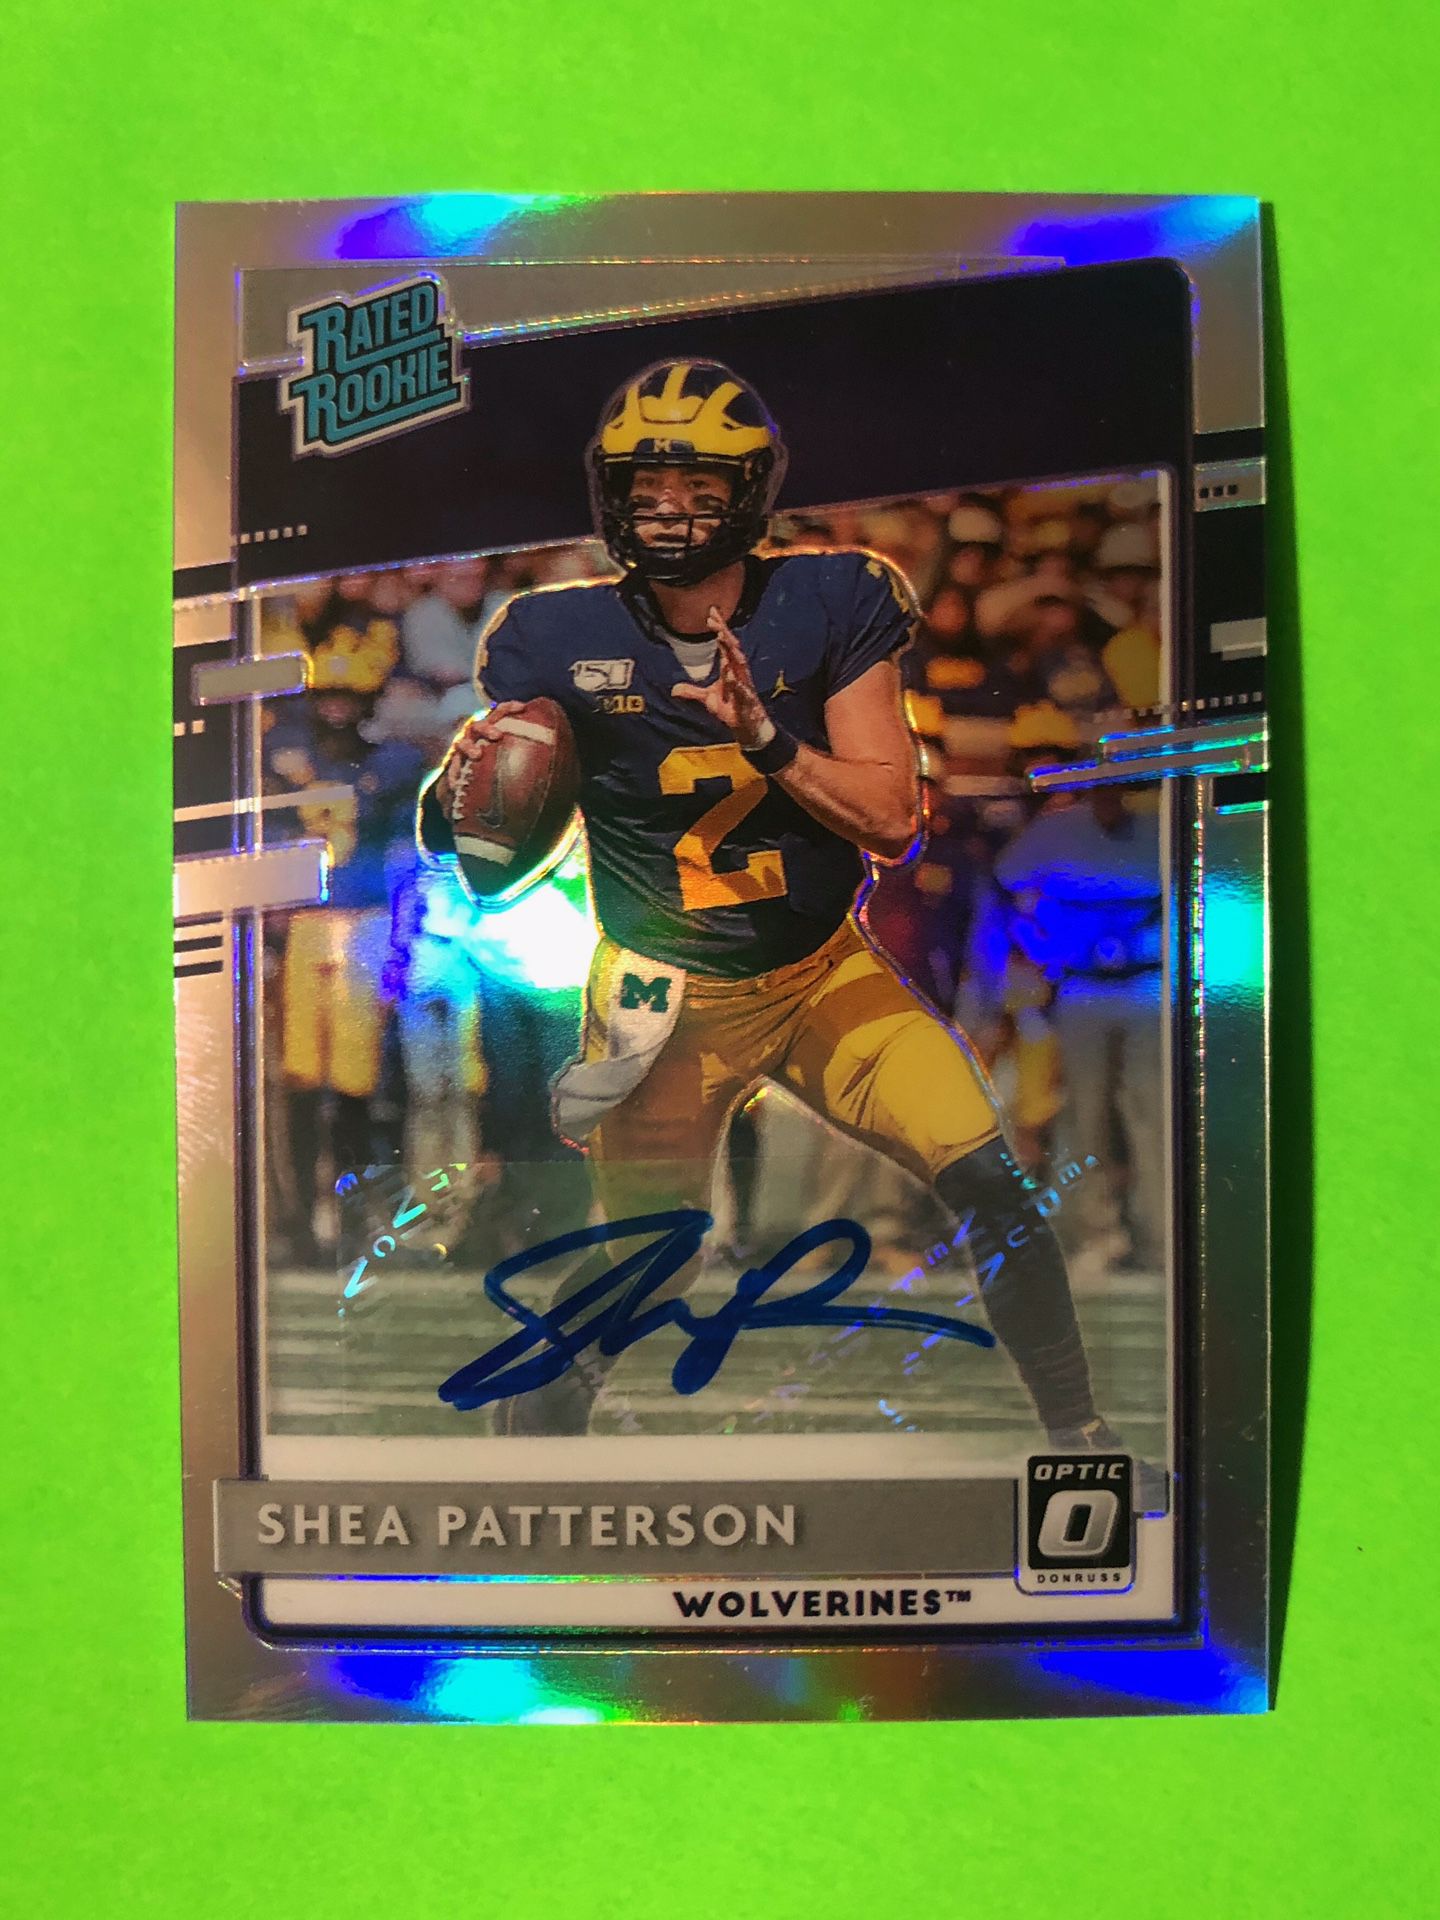 Shea Patterson Signed Card